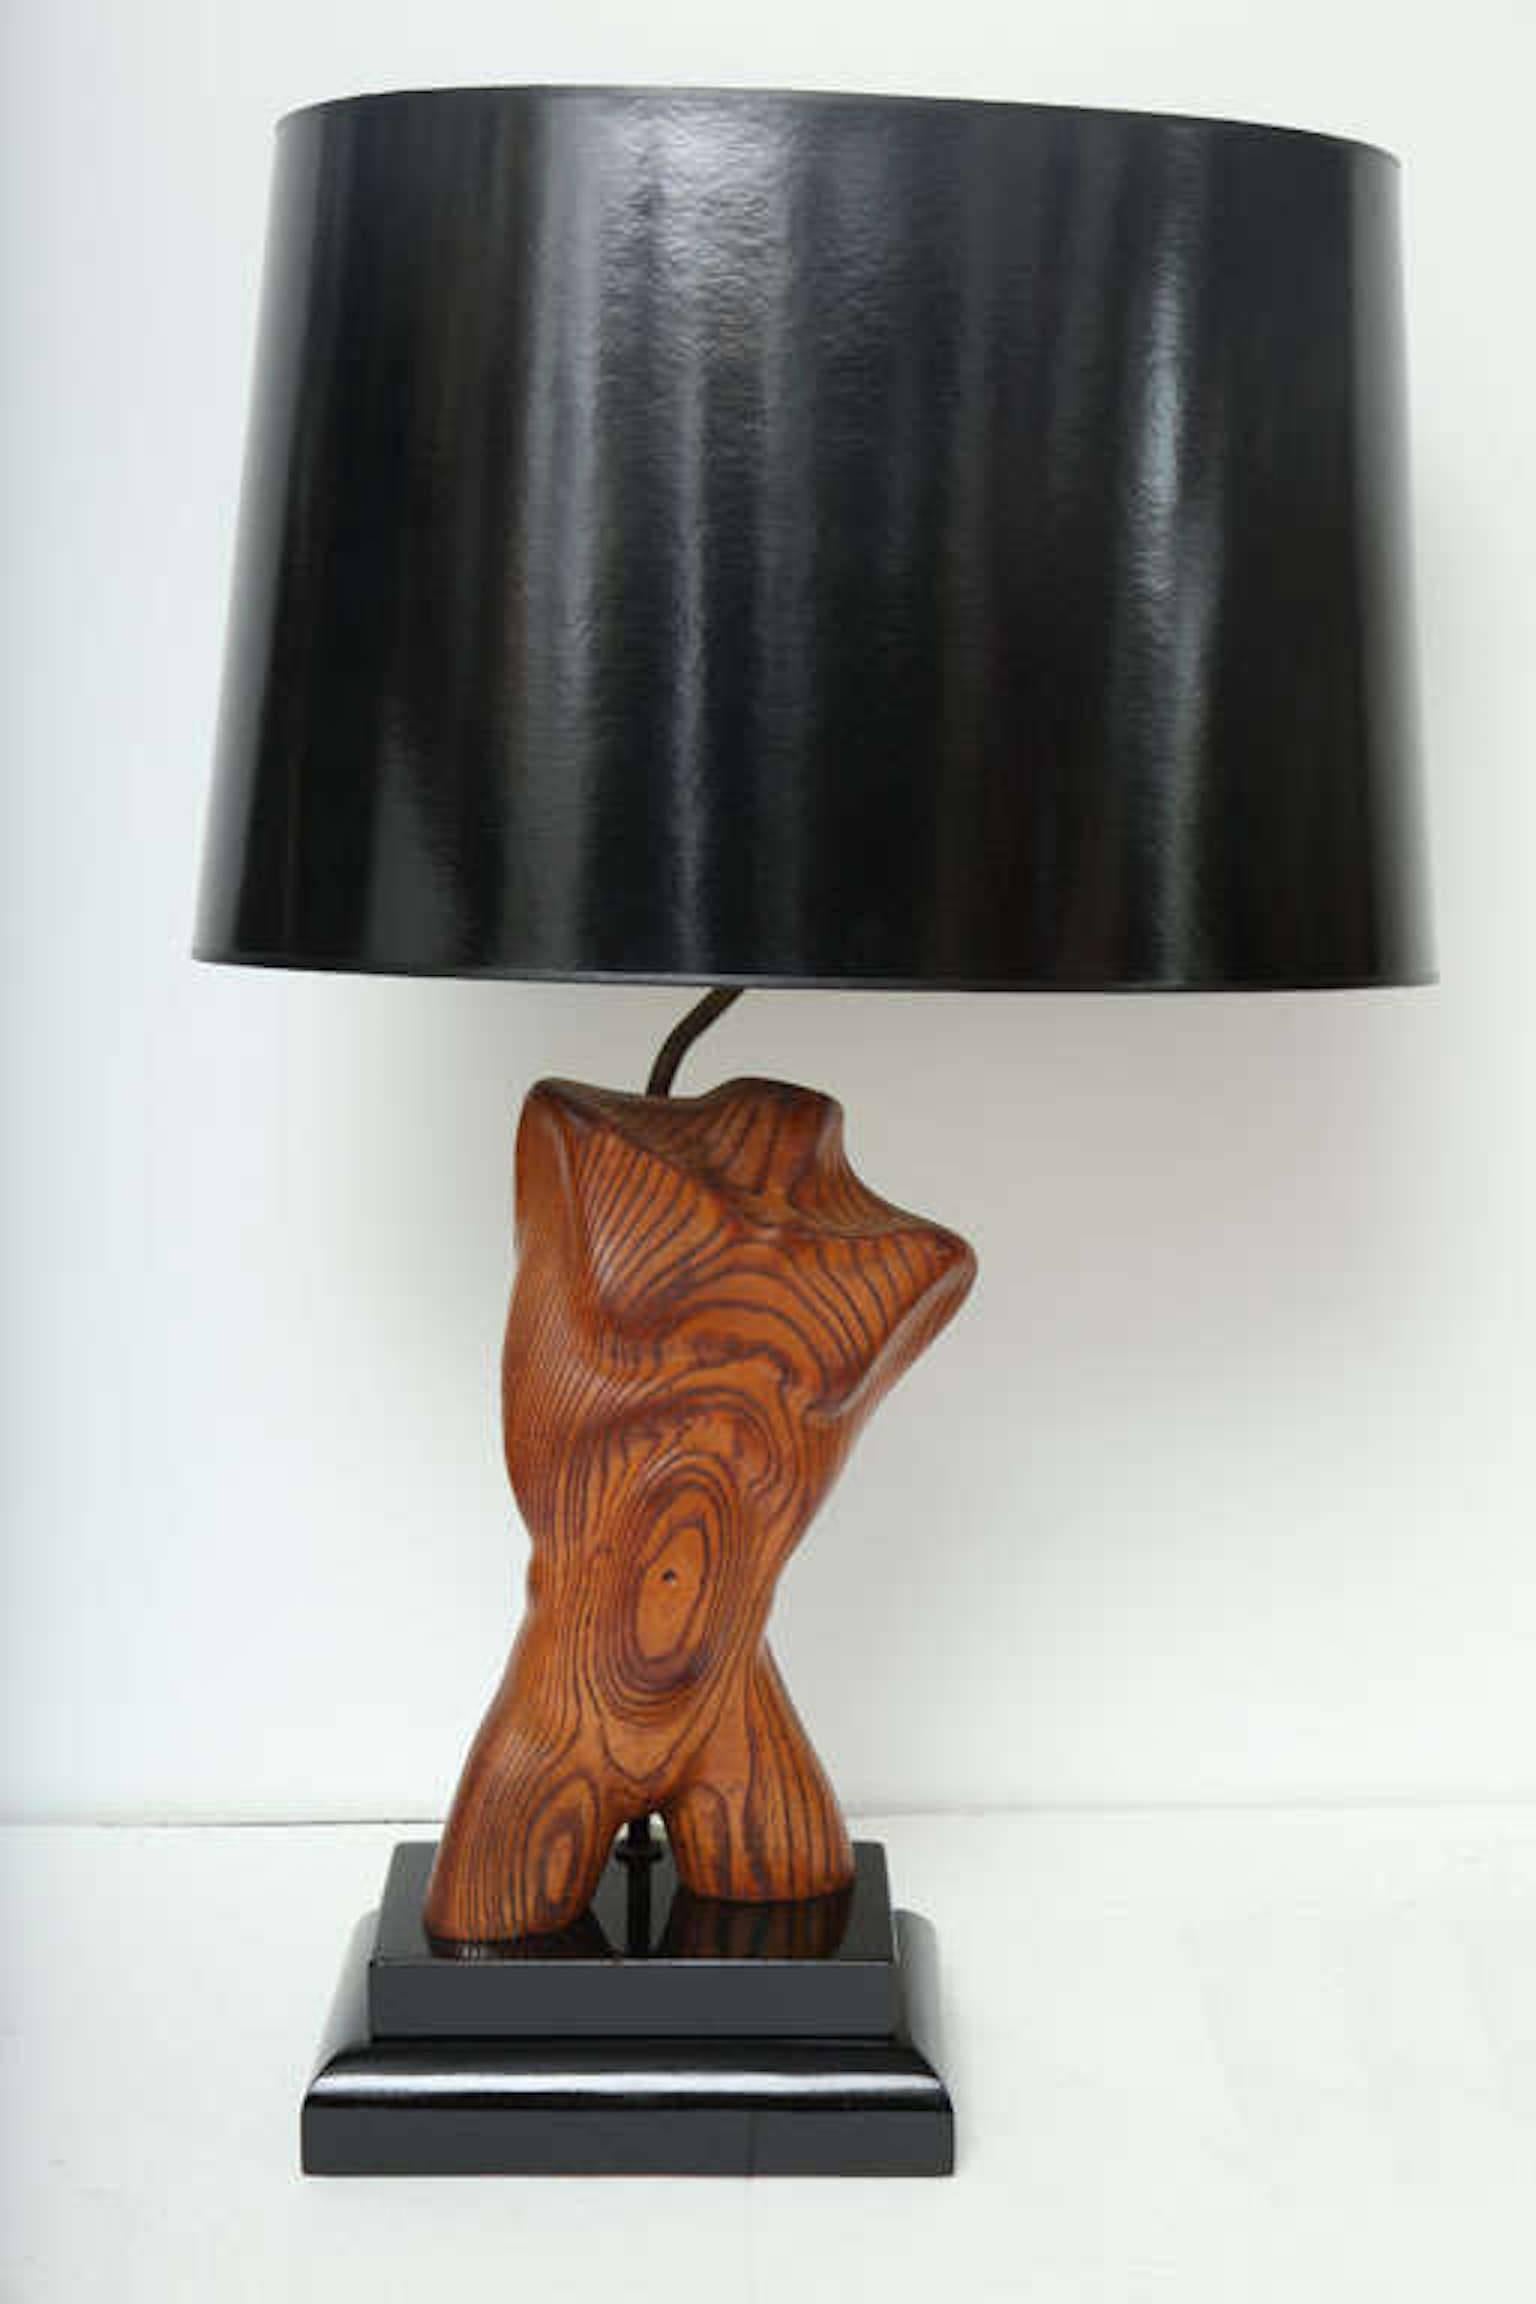 Decorative wood carved male nude table lamp by Keifetz. Signed, C 1950.